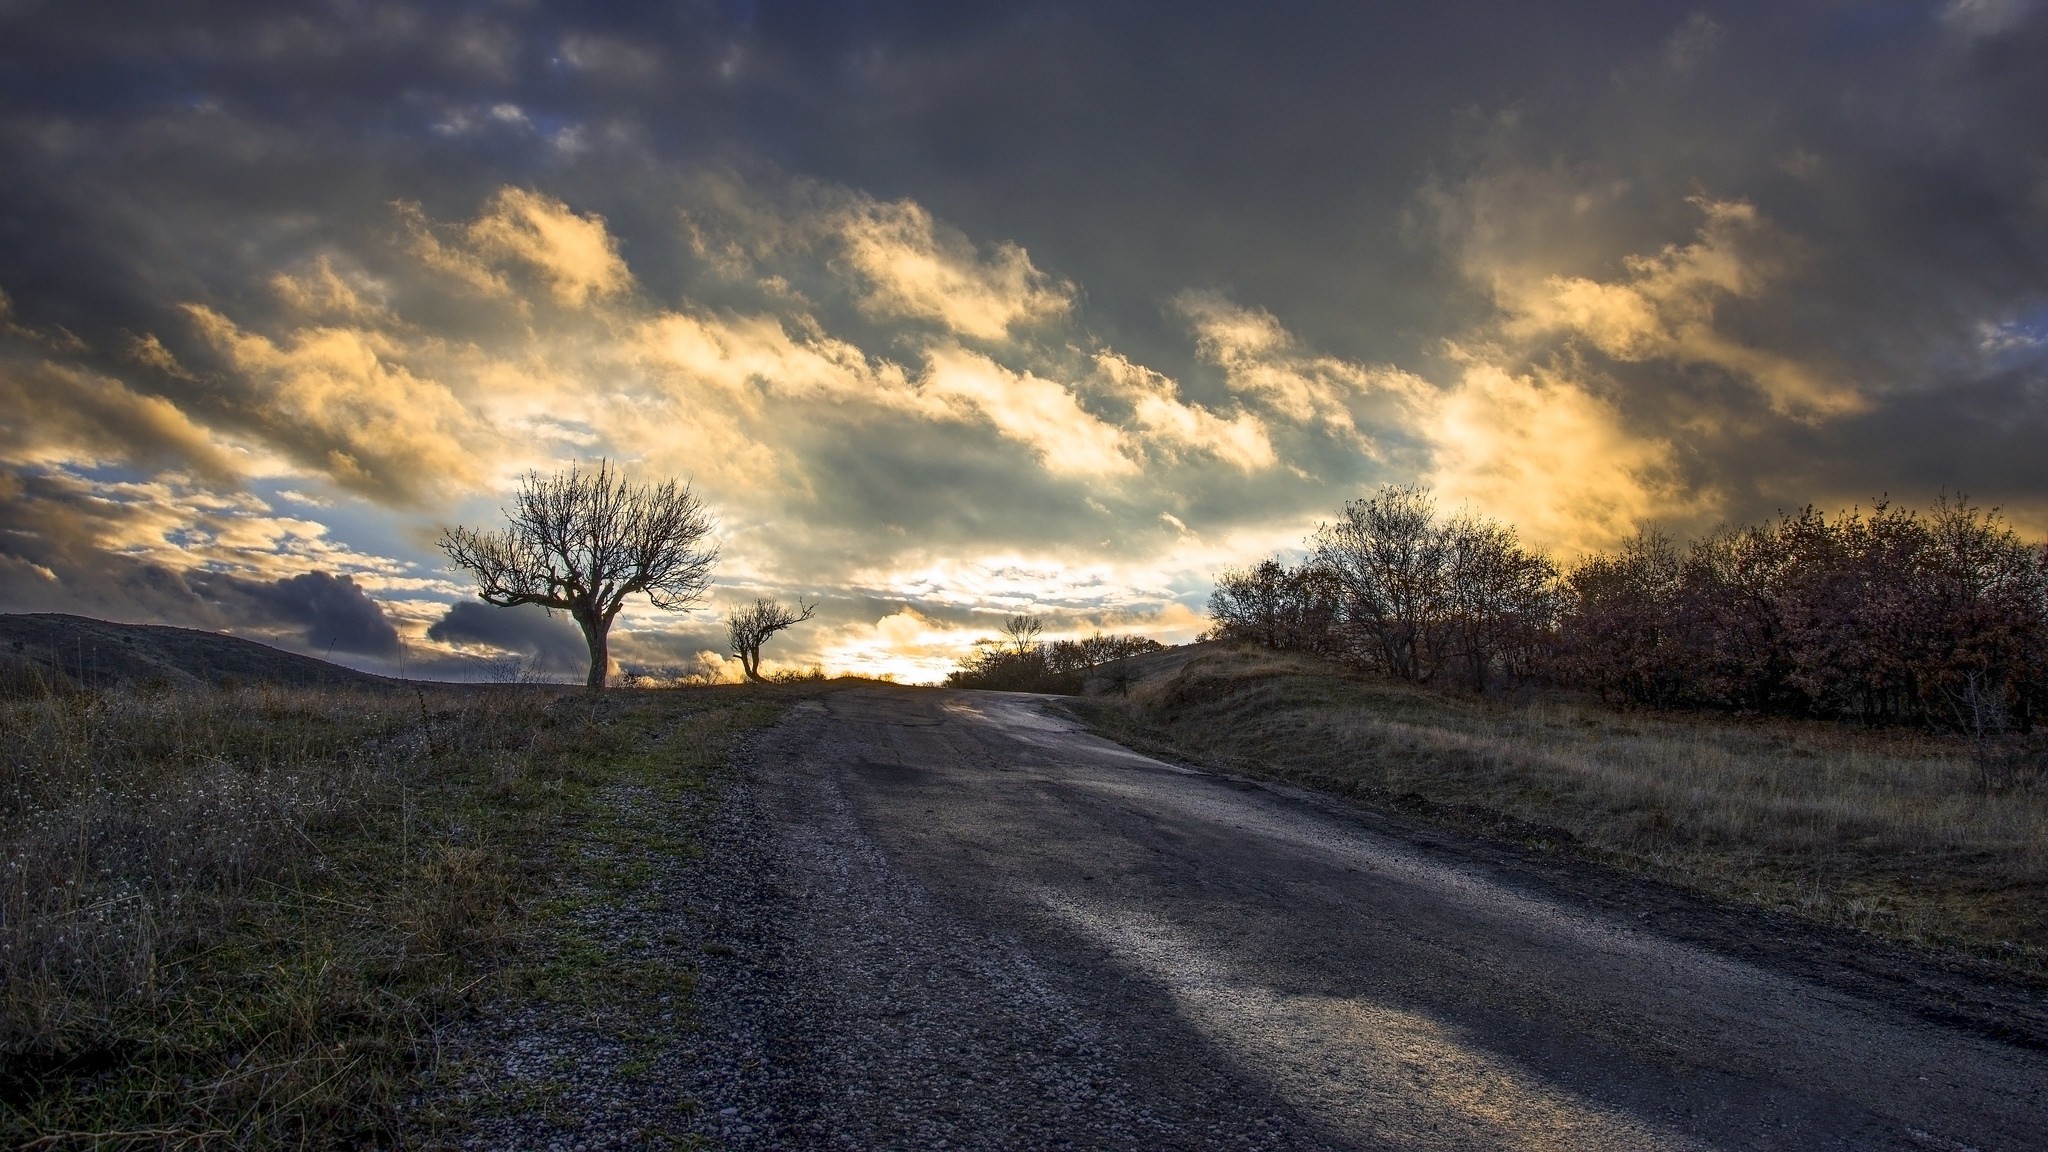 General 2048x1152 clouds road trees landscape dirt road outdoors sky